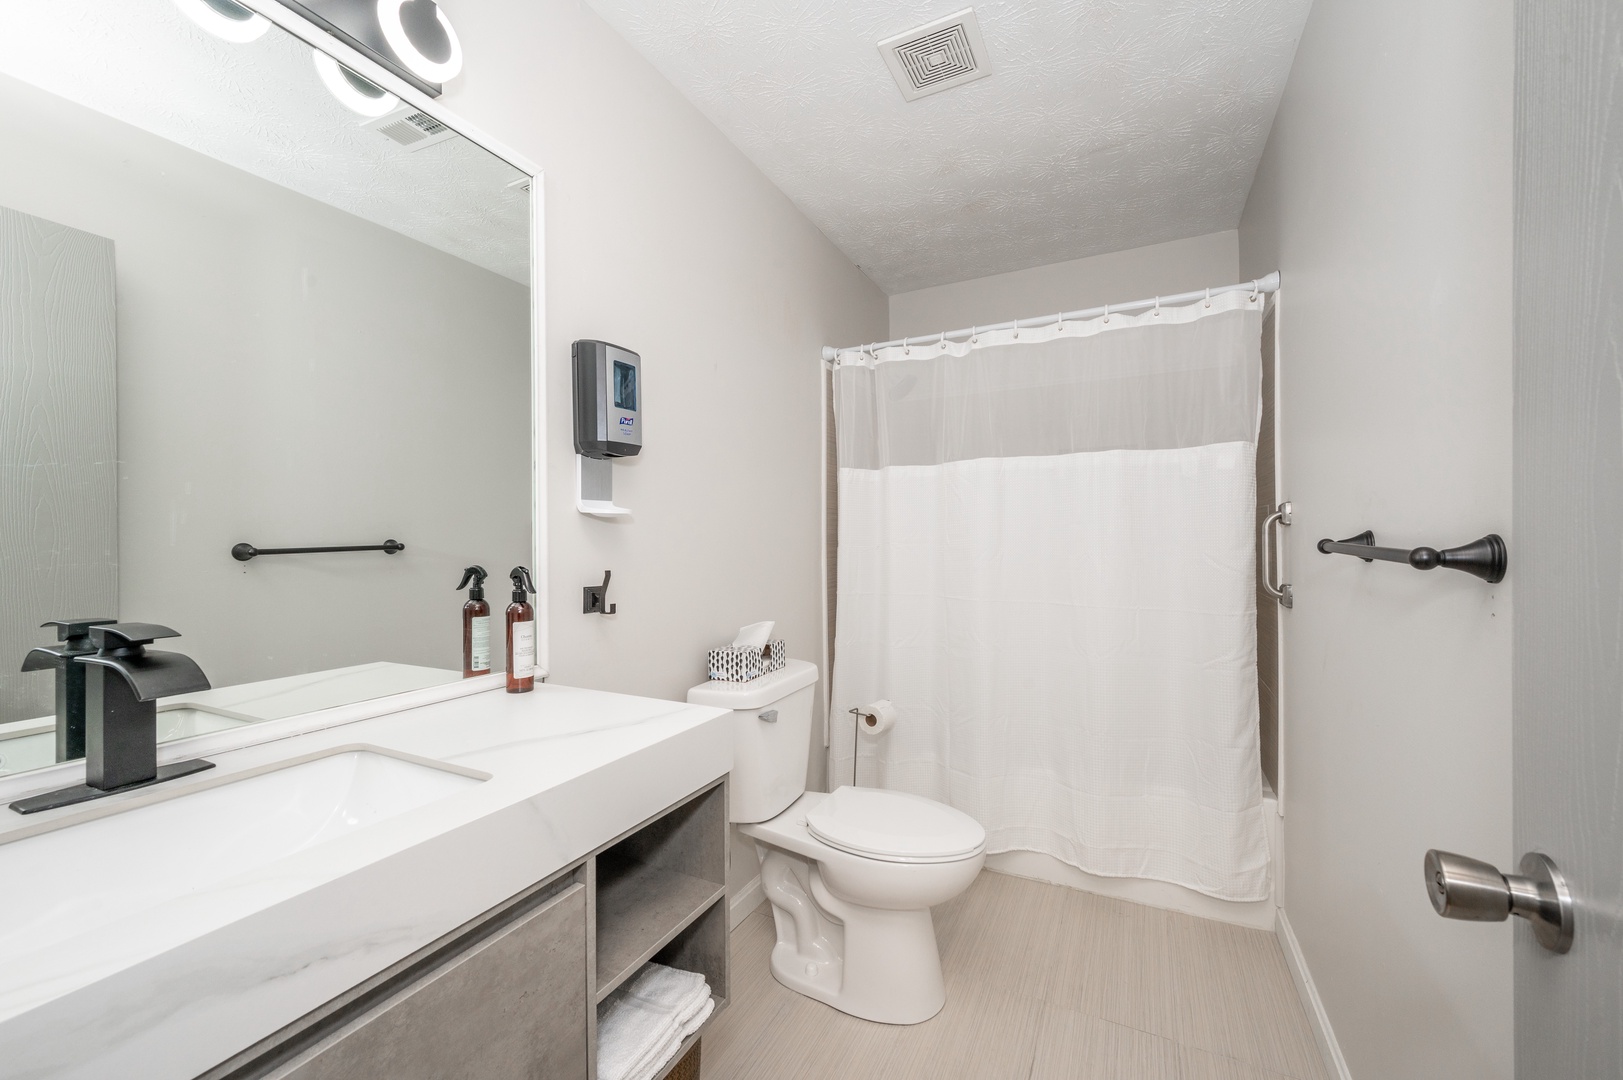 The full bathroom features a single vanity & shower/tub combo